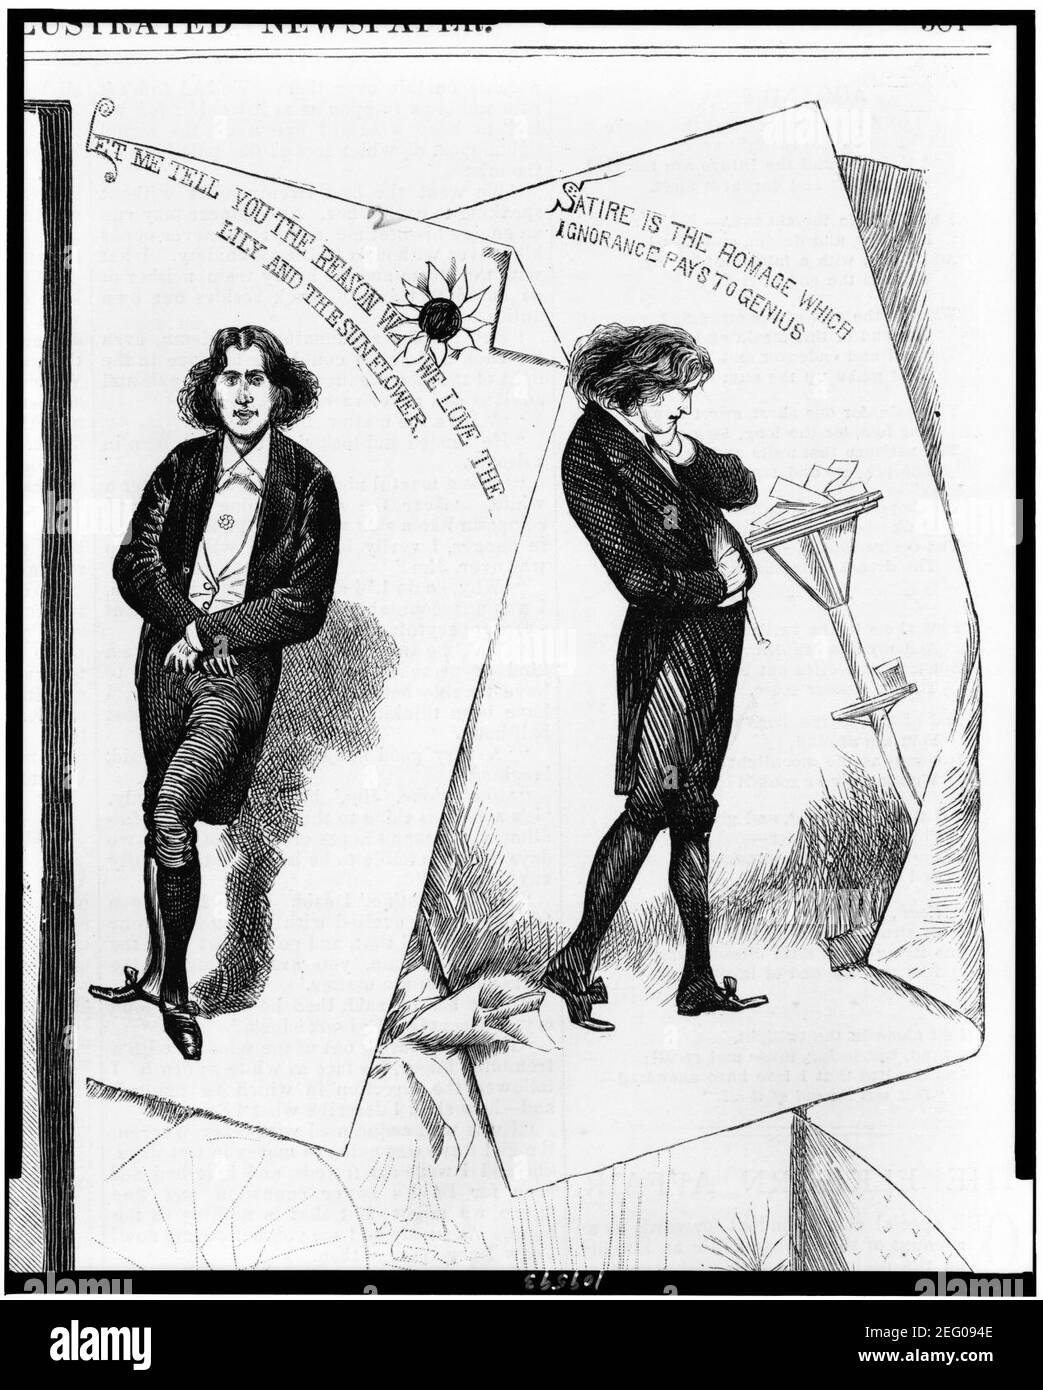 Oscar Wilde, the apostle of aestheticism - from sketches by a staff artist. Stock Photo